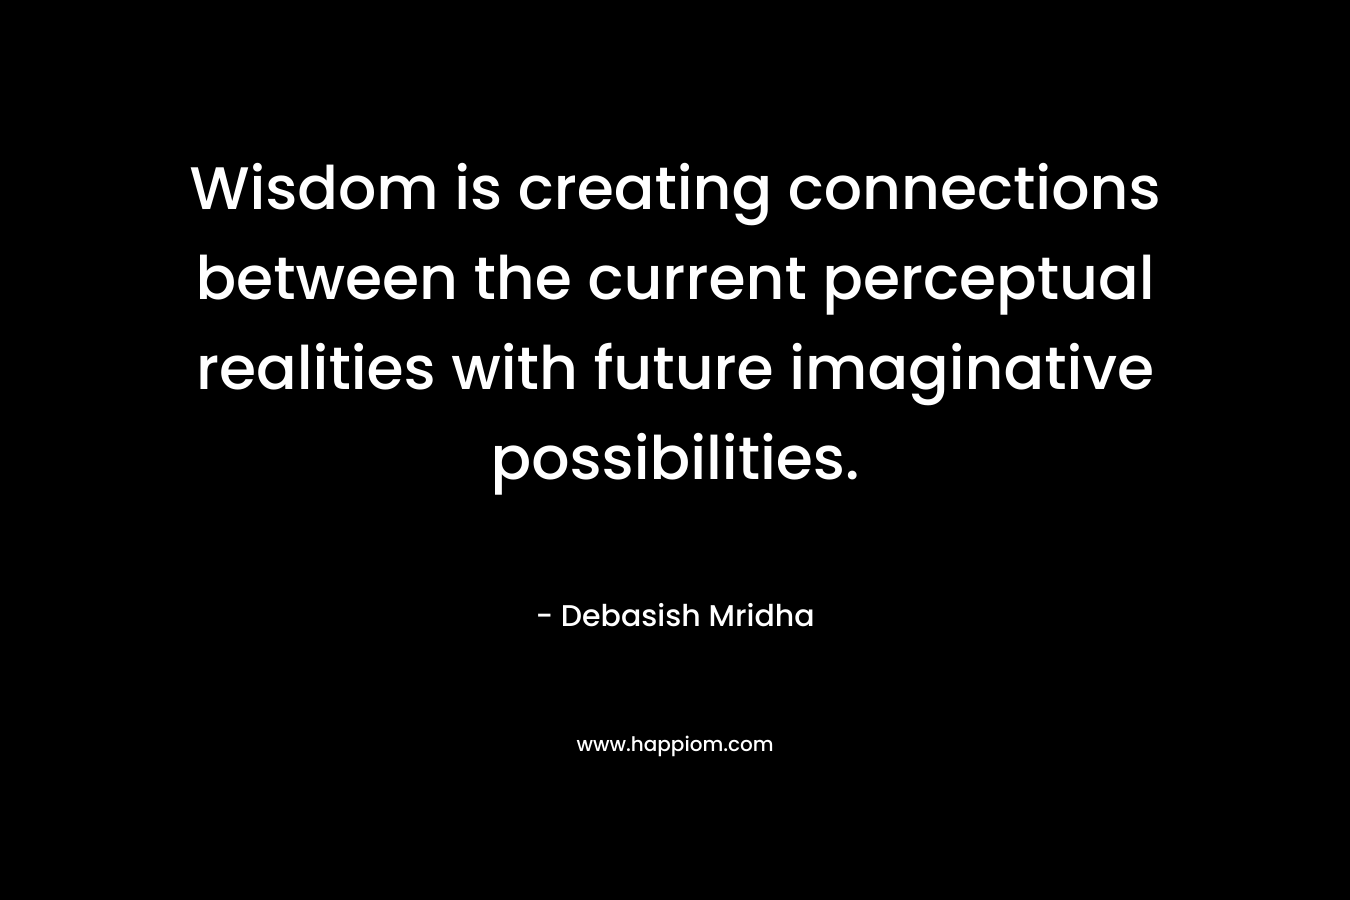 Wisdom is creating connections between the current perceptual realities with future imaginative possibilities.